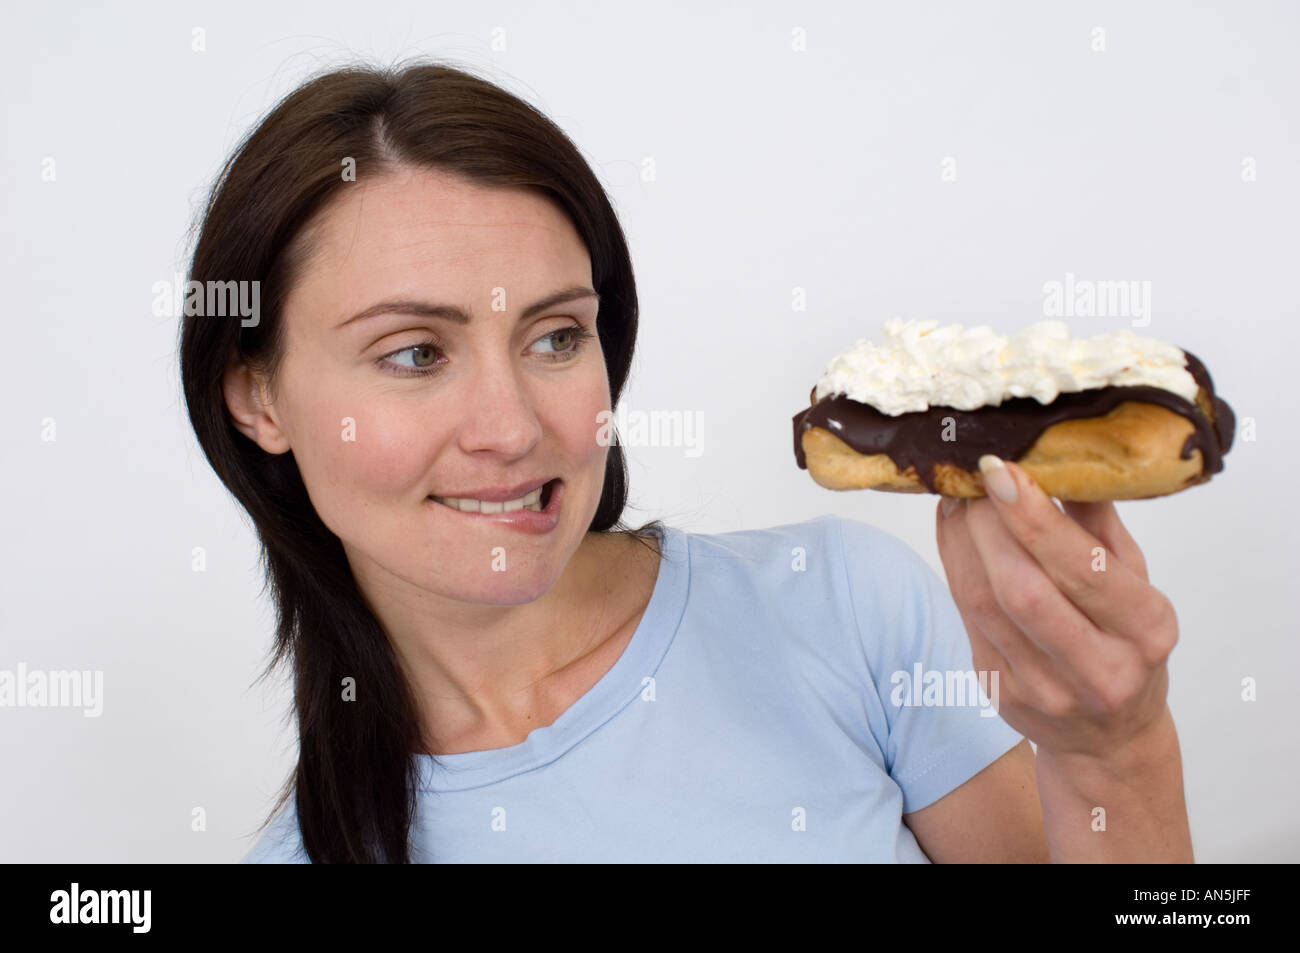 woman about to eat a chocolate slice Stock Photo